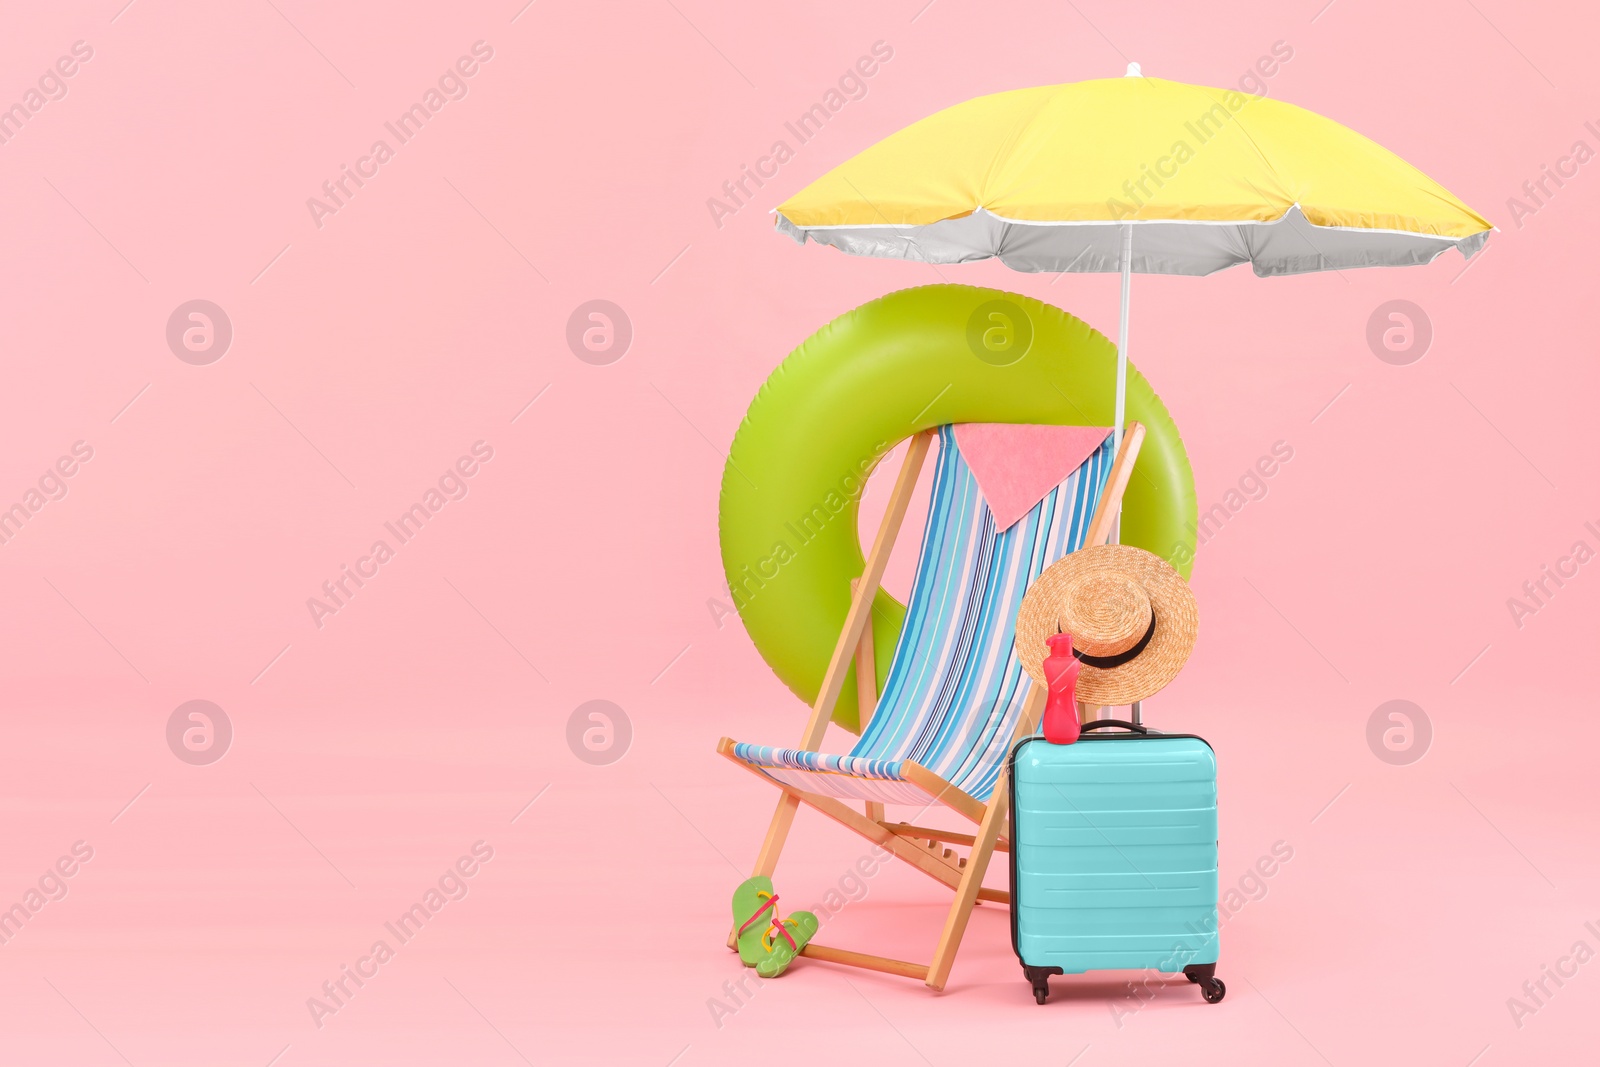 Photo of Deck chair, umbrella, suitcase and beach accessories against pink background, space for text. Summer vacation